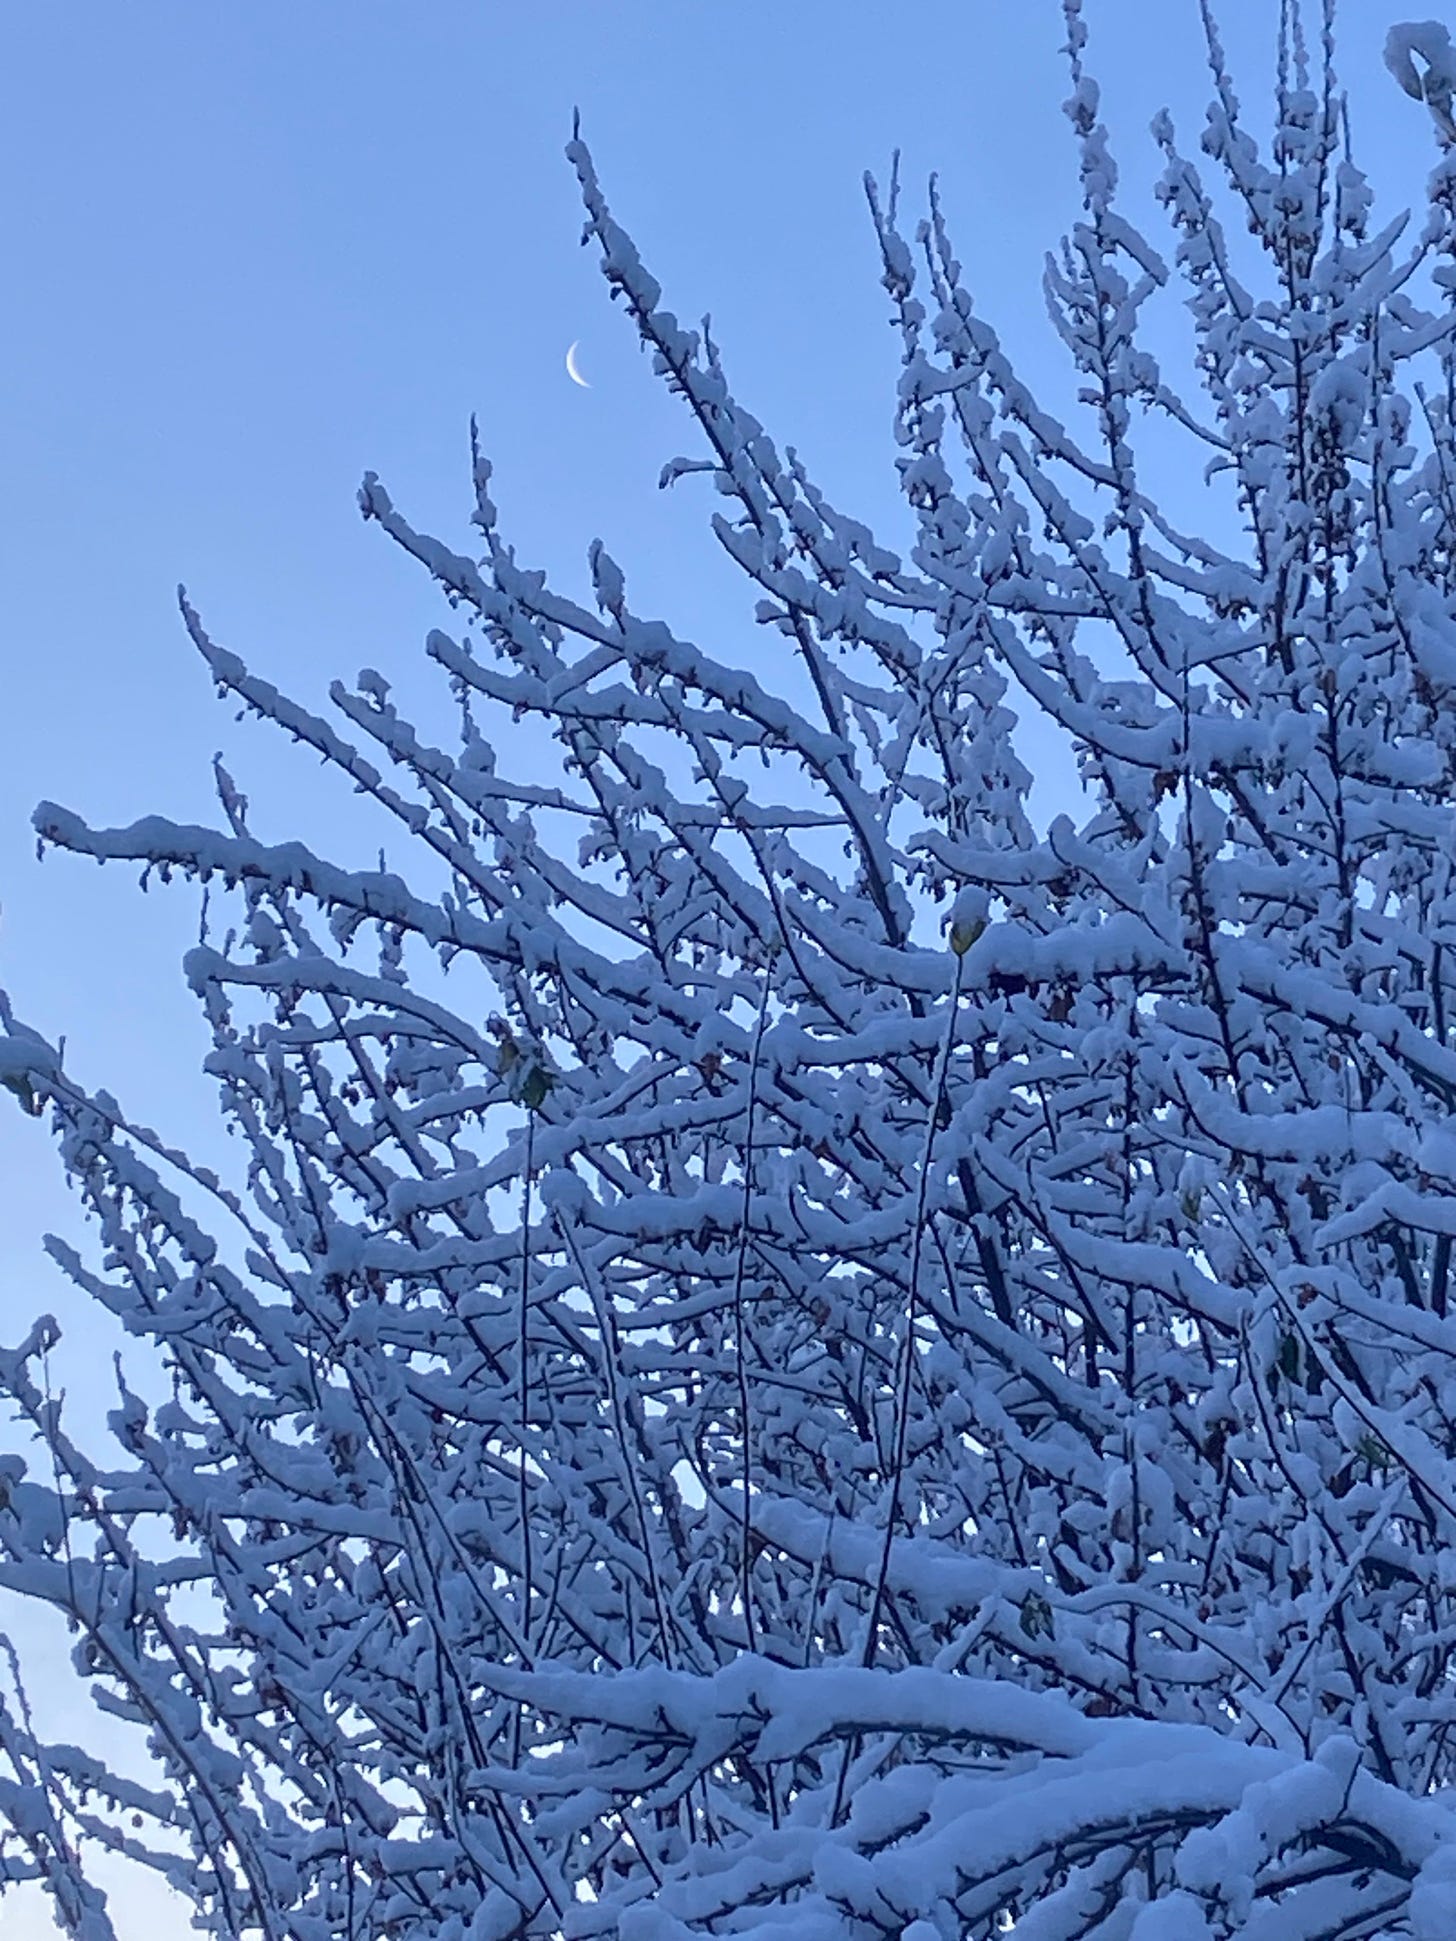 Sliver moon between snowy branches